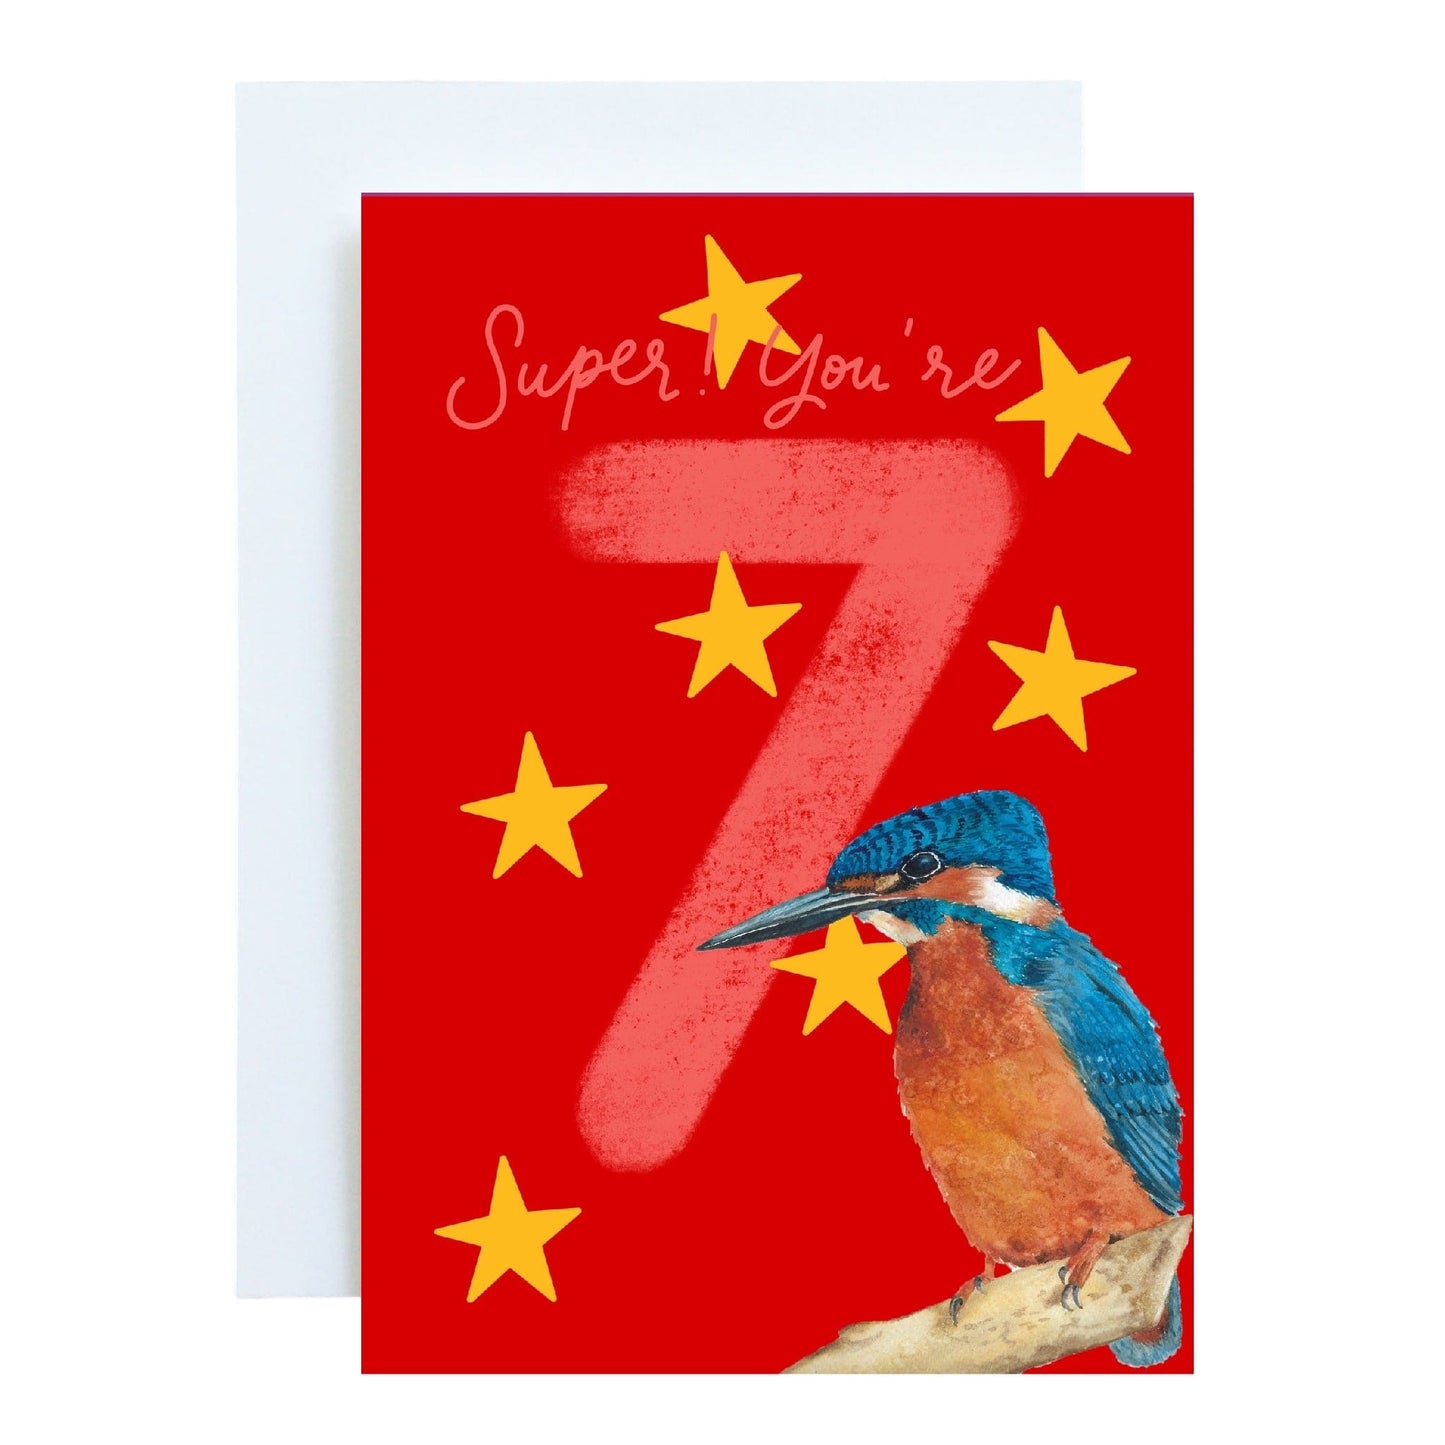 And Hope Designs Cards 7 - Seventh birthday Card - Bright “Super! You’re 7” with kingfisher